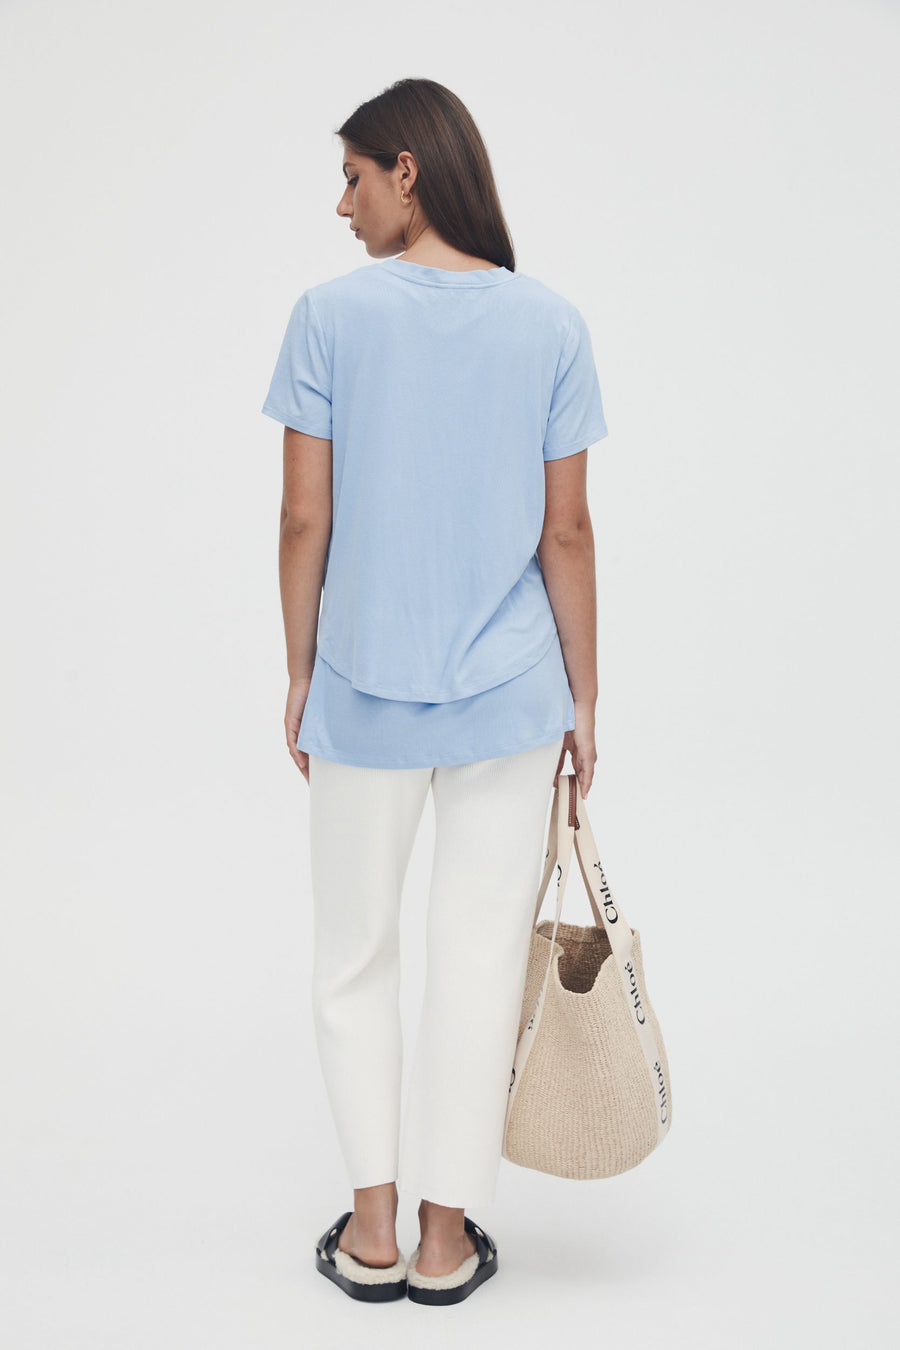 Stretchy Maternity Tee (Pale Blue) 6